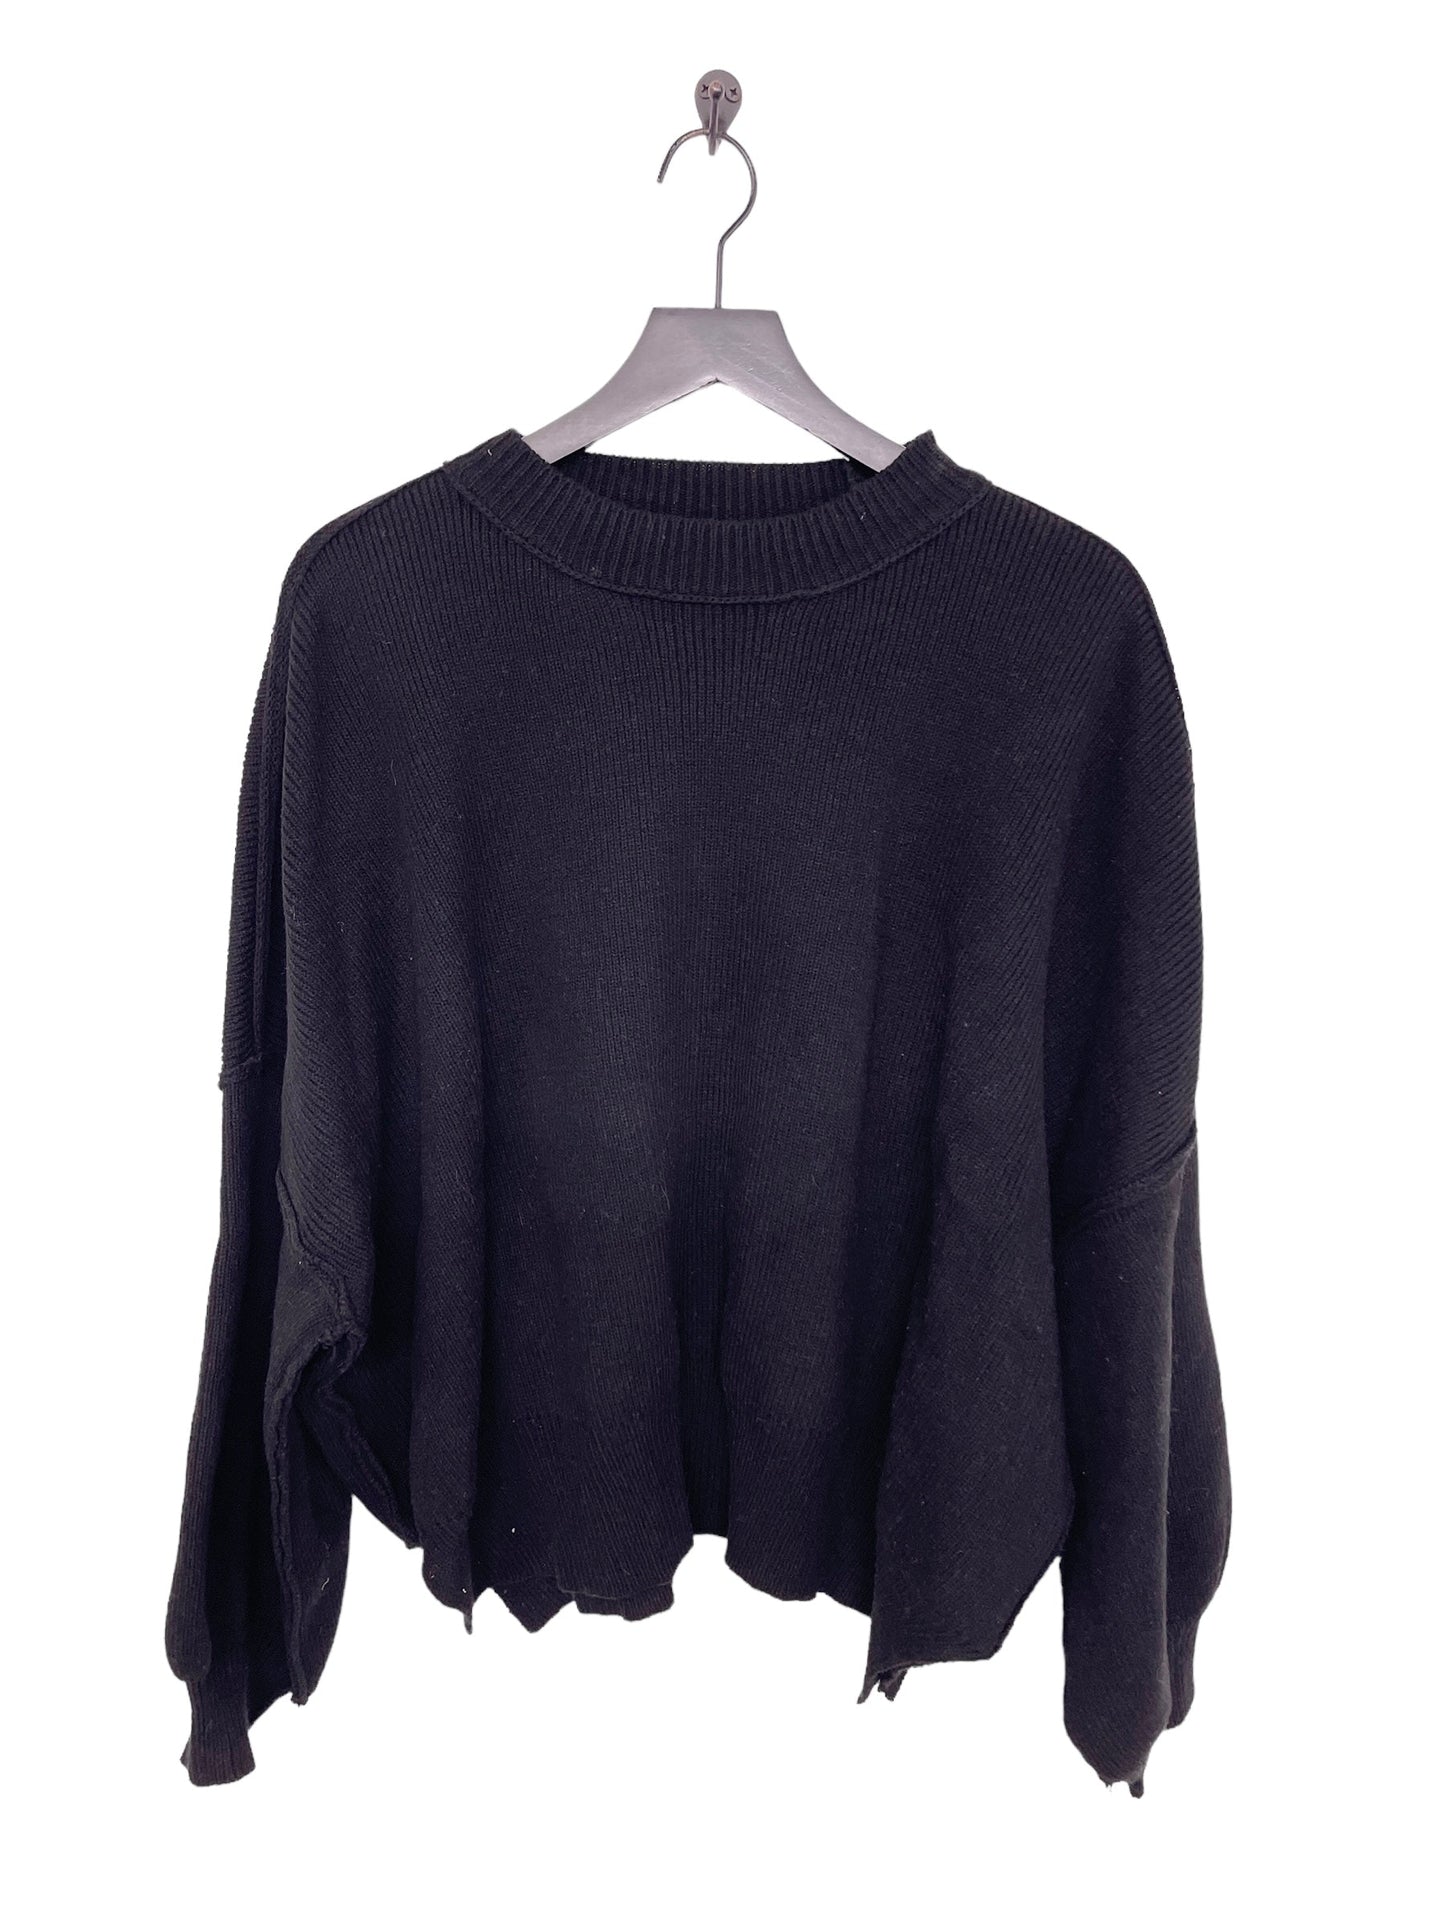 Black Sweater Clothes Mentor, Size M